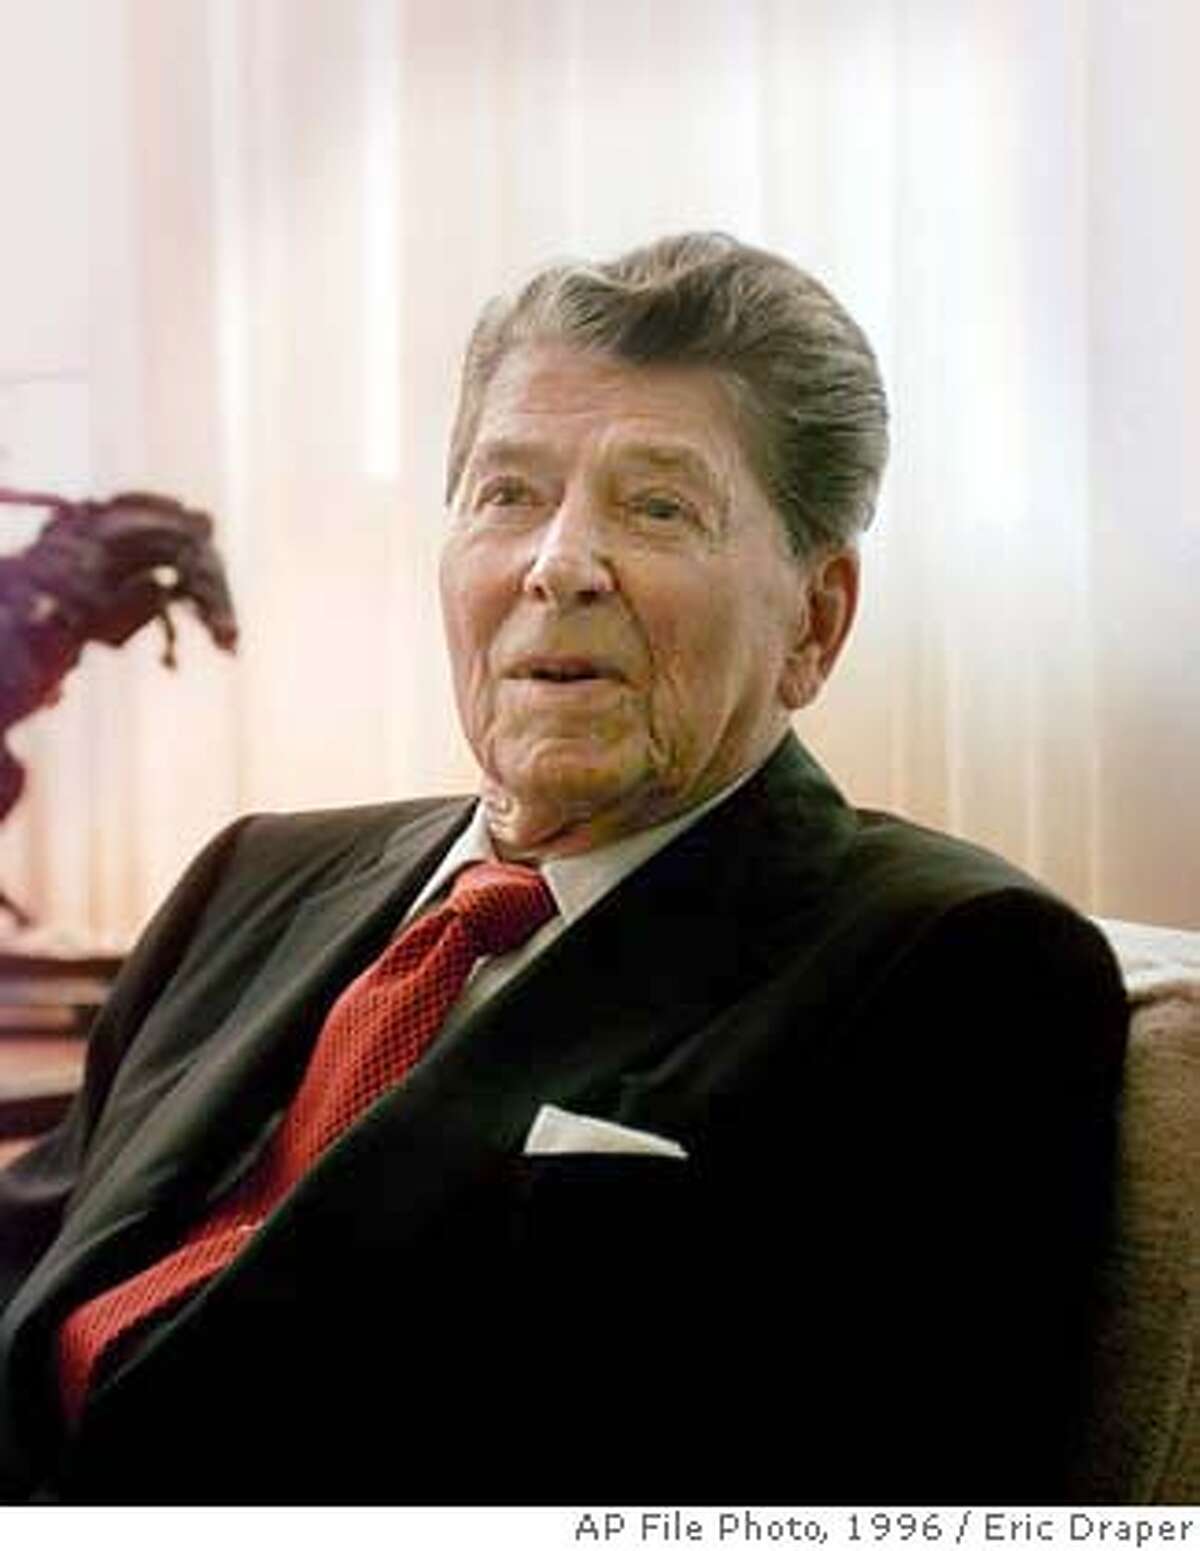 Former president Ronald Reagan sits in his office during a visit by Republican presidential hopeful Bob Dole and his wife Elizabeth, Wednesday, July 3, 1996 in Los Angeles. (AP Photo/Eric Draper)